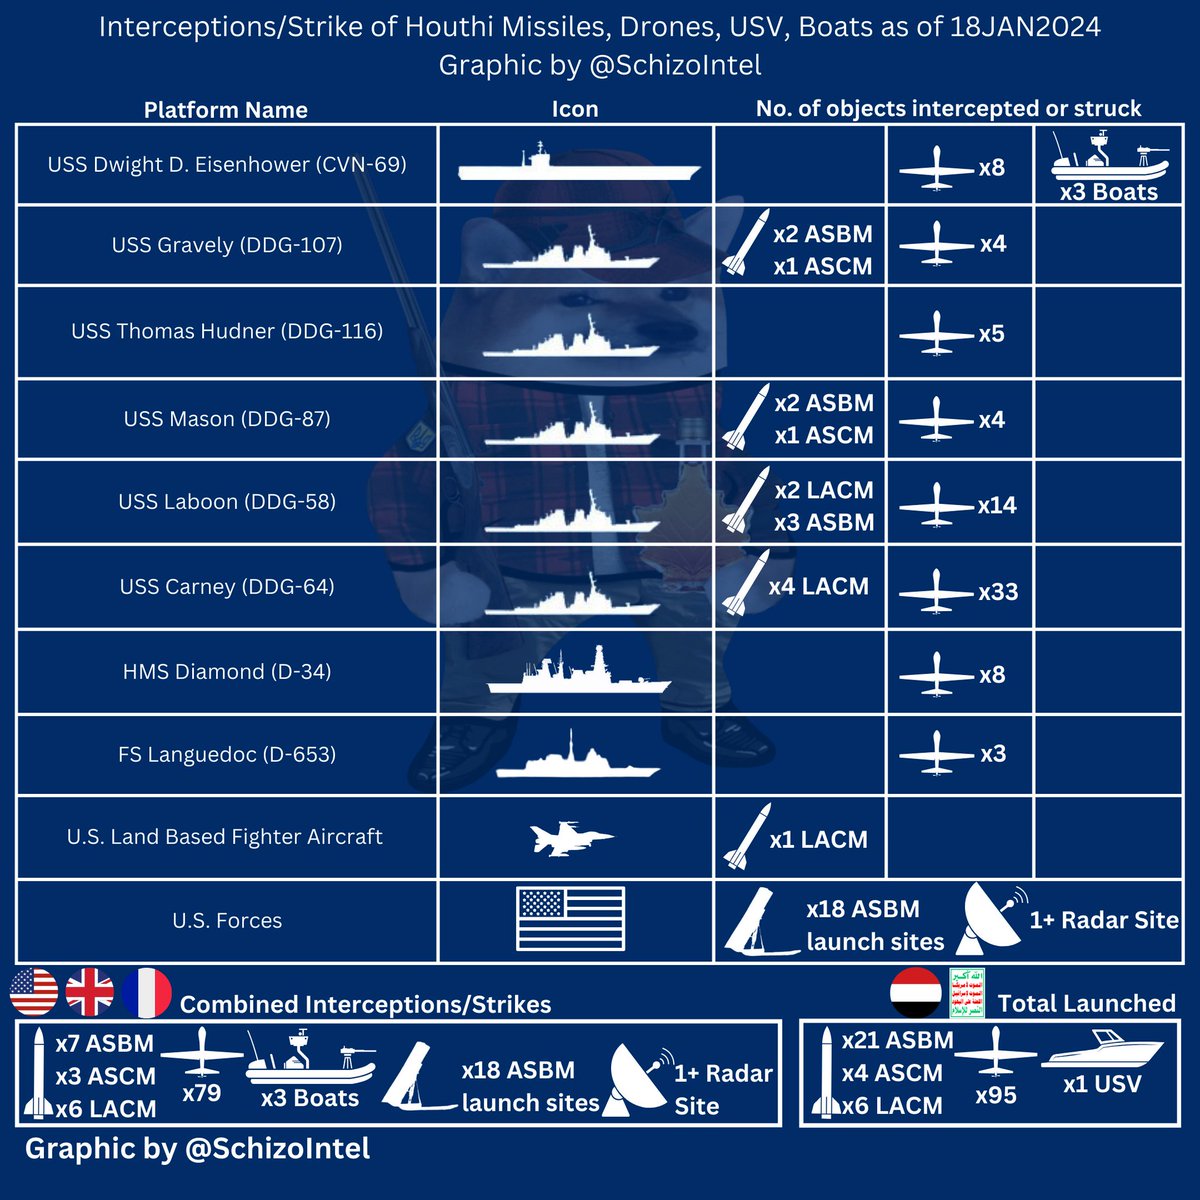 18JAN2024 UPDATED Infographic of Houthi Missiles, Drones, USV's, Manned boat launches, interceptions by Coalition Warships and Atalanta Threat update spreadsheet visualized. Total interceptions/Strikes by Coalition Forces. 3x ASCM 6x LACM 7x ASBM 79x Drones 3x Speed boats…